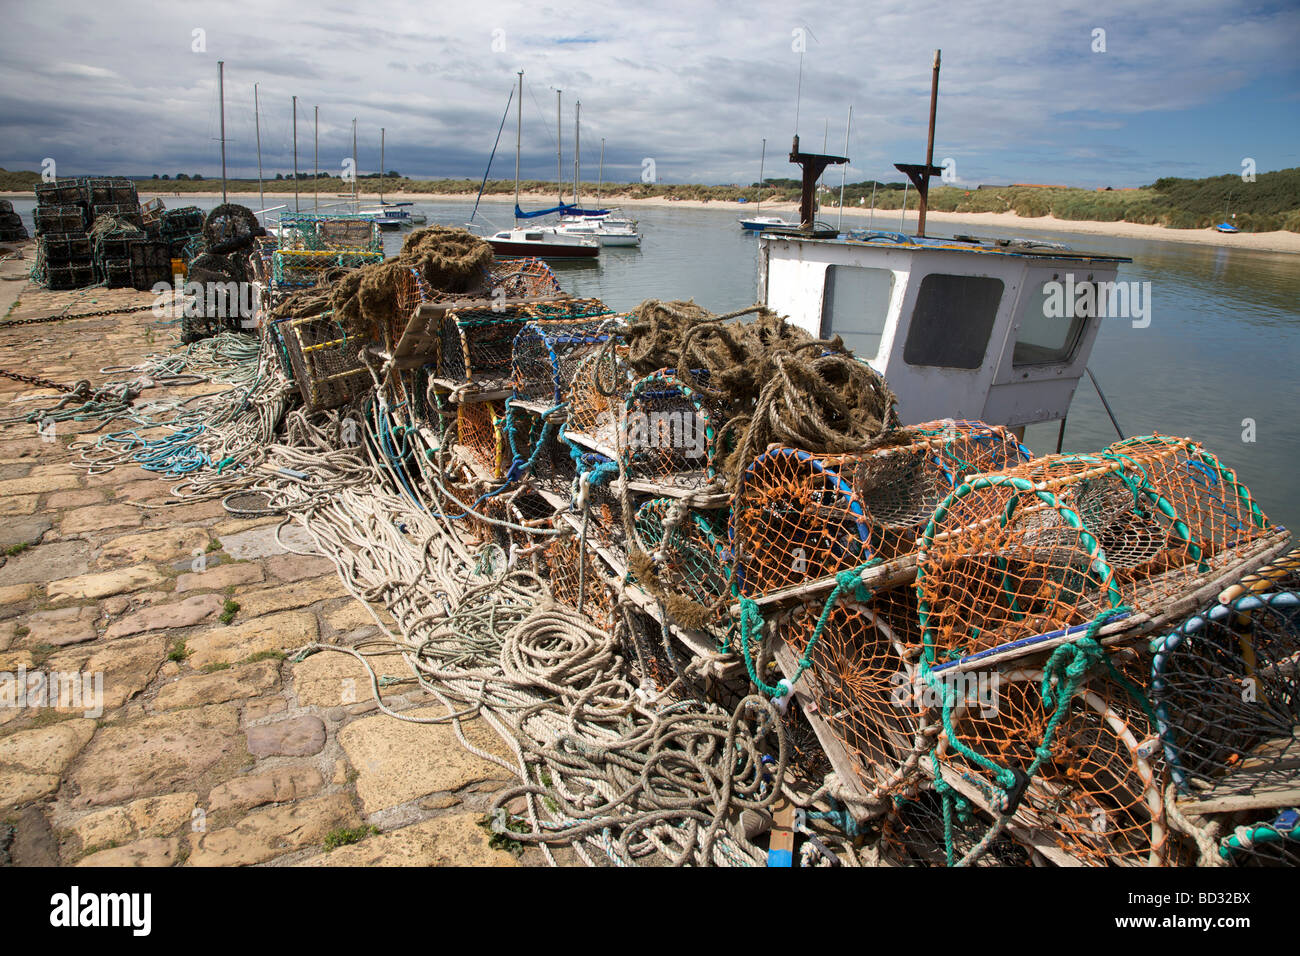 Fishing boats and nets at Beadnell Bay  harbour, Northumberland, Northeast England,UK Stock Photo